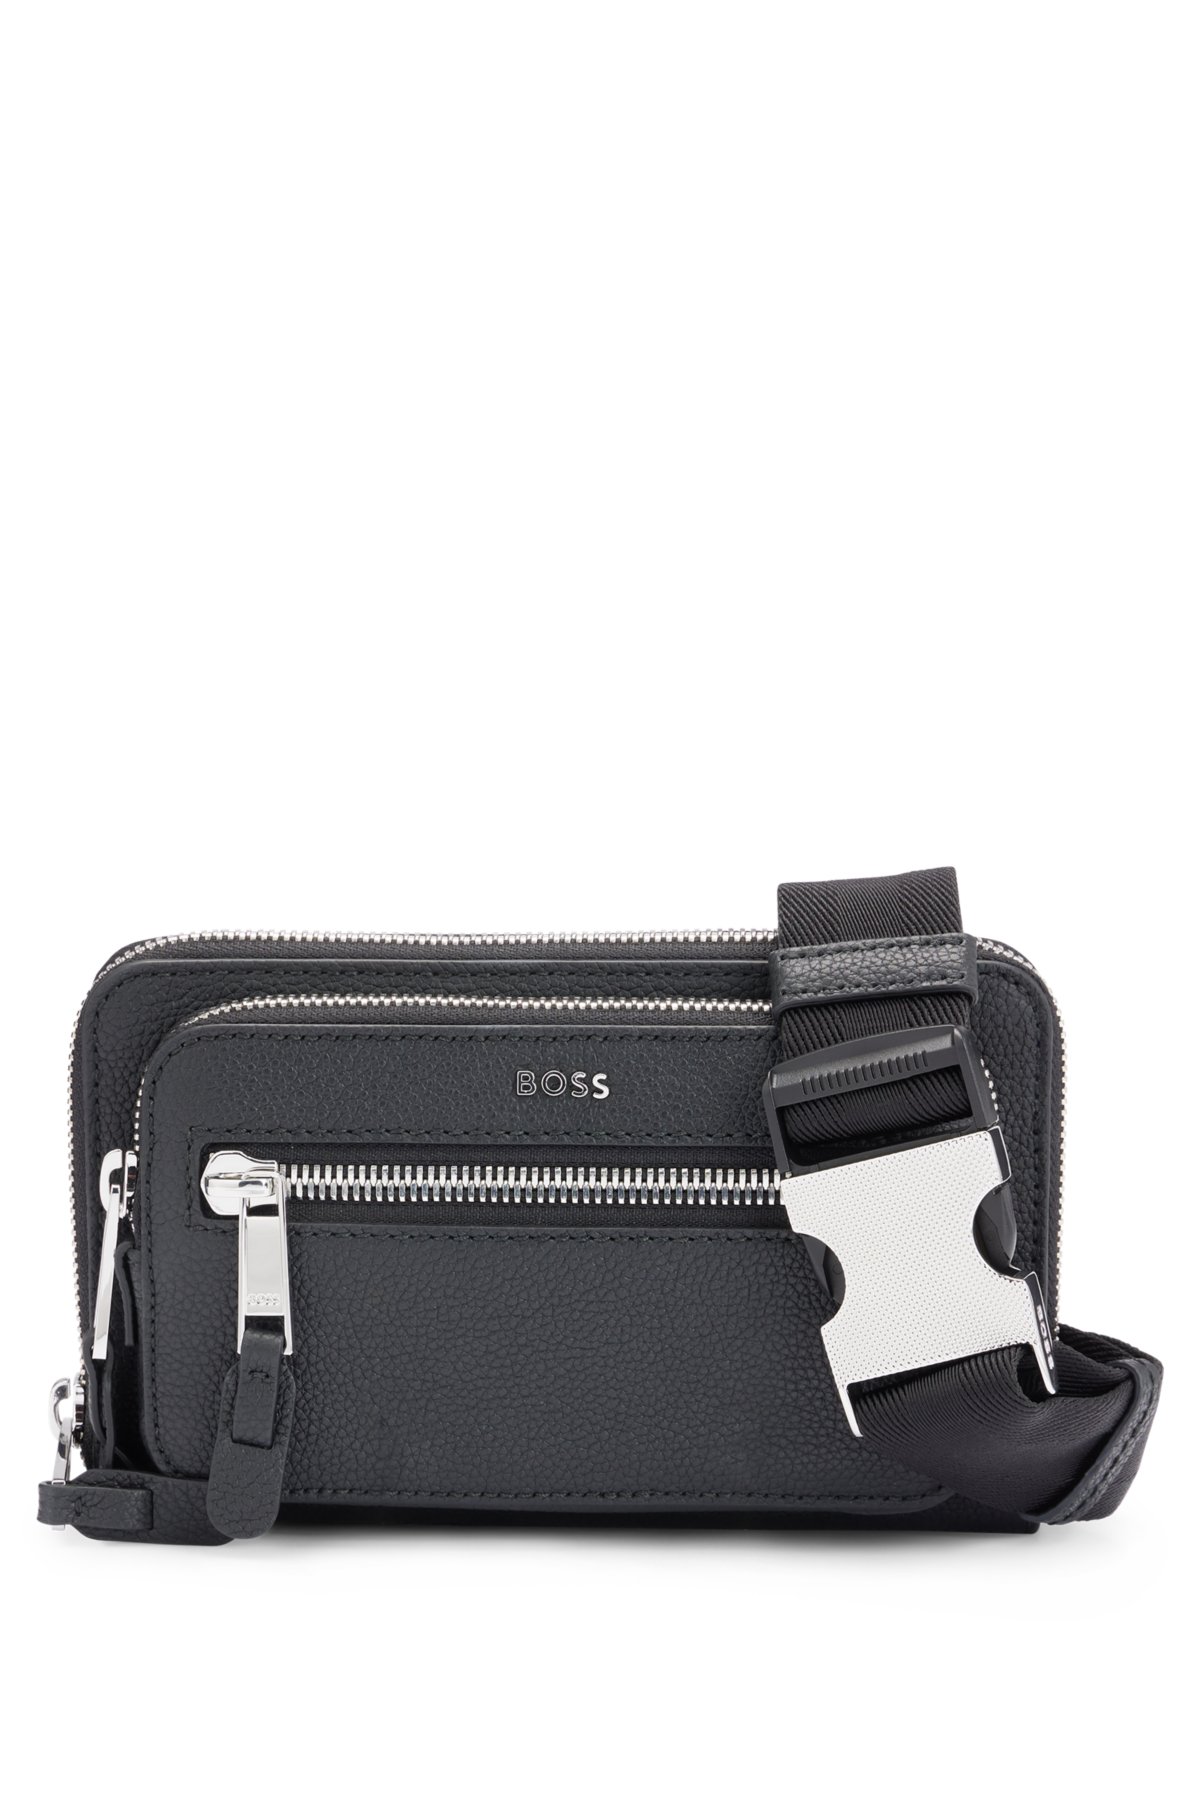 BOSS - Crossbody bag in with grained logo lettering leather